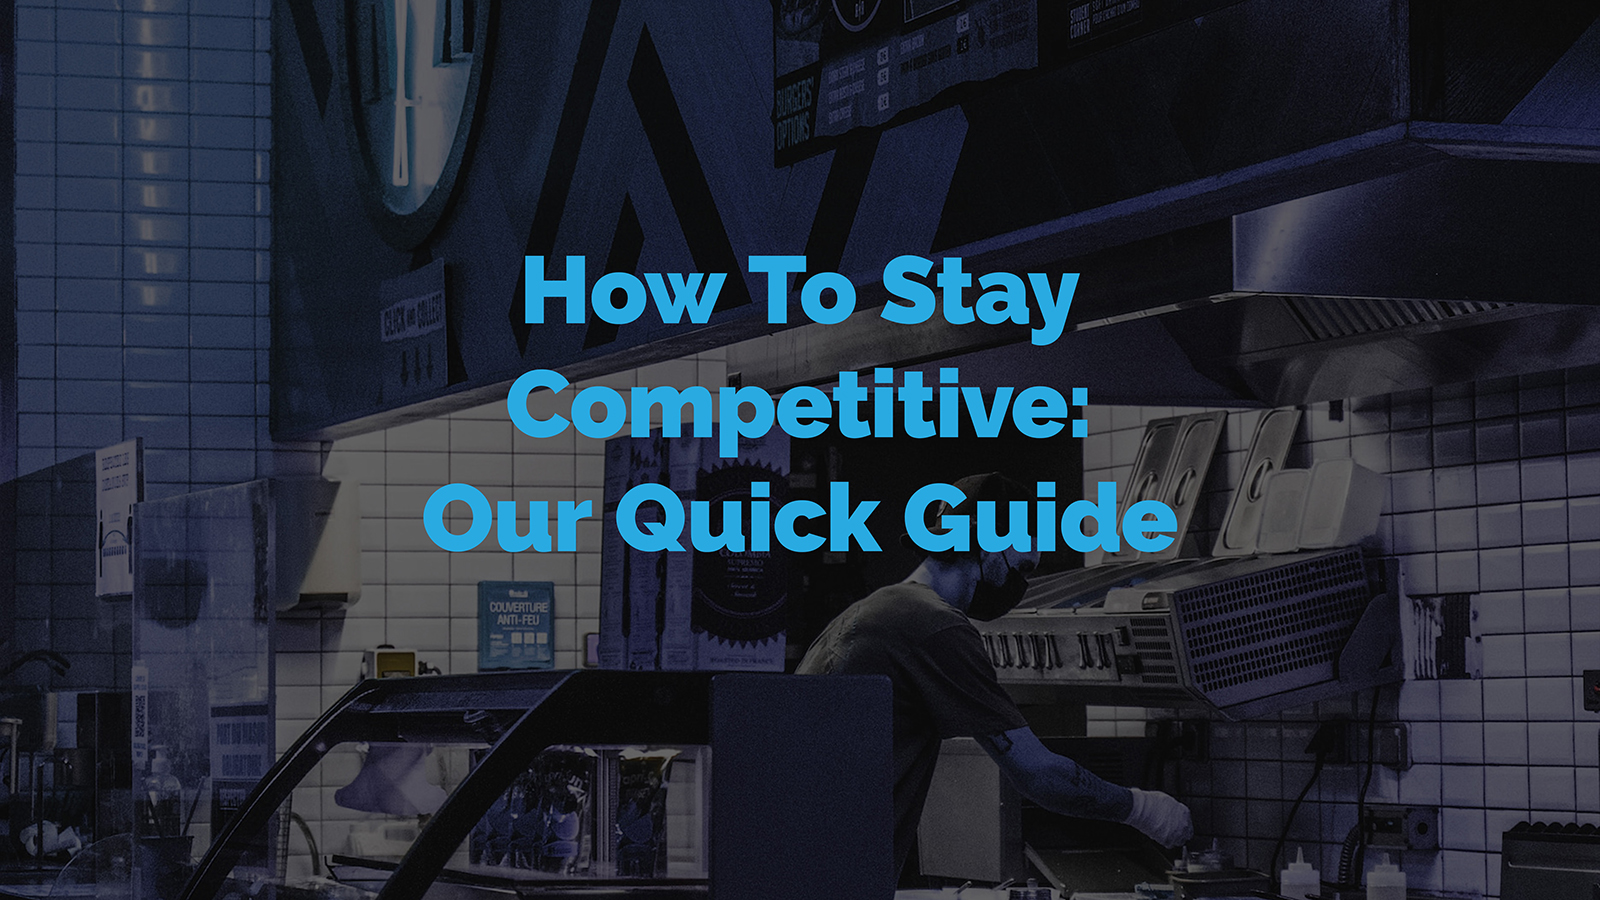 Are you ready for your competition? Our Quick Competitive Guide